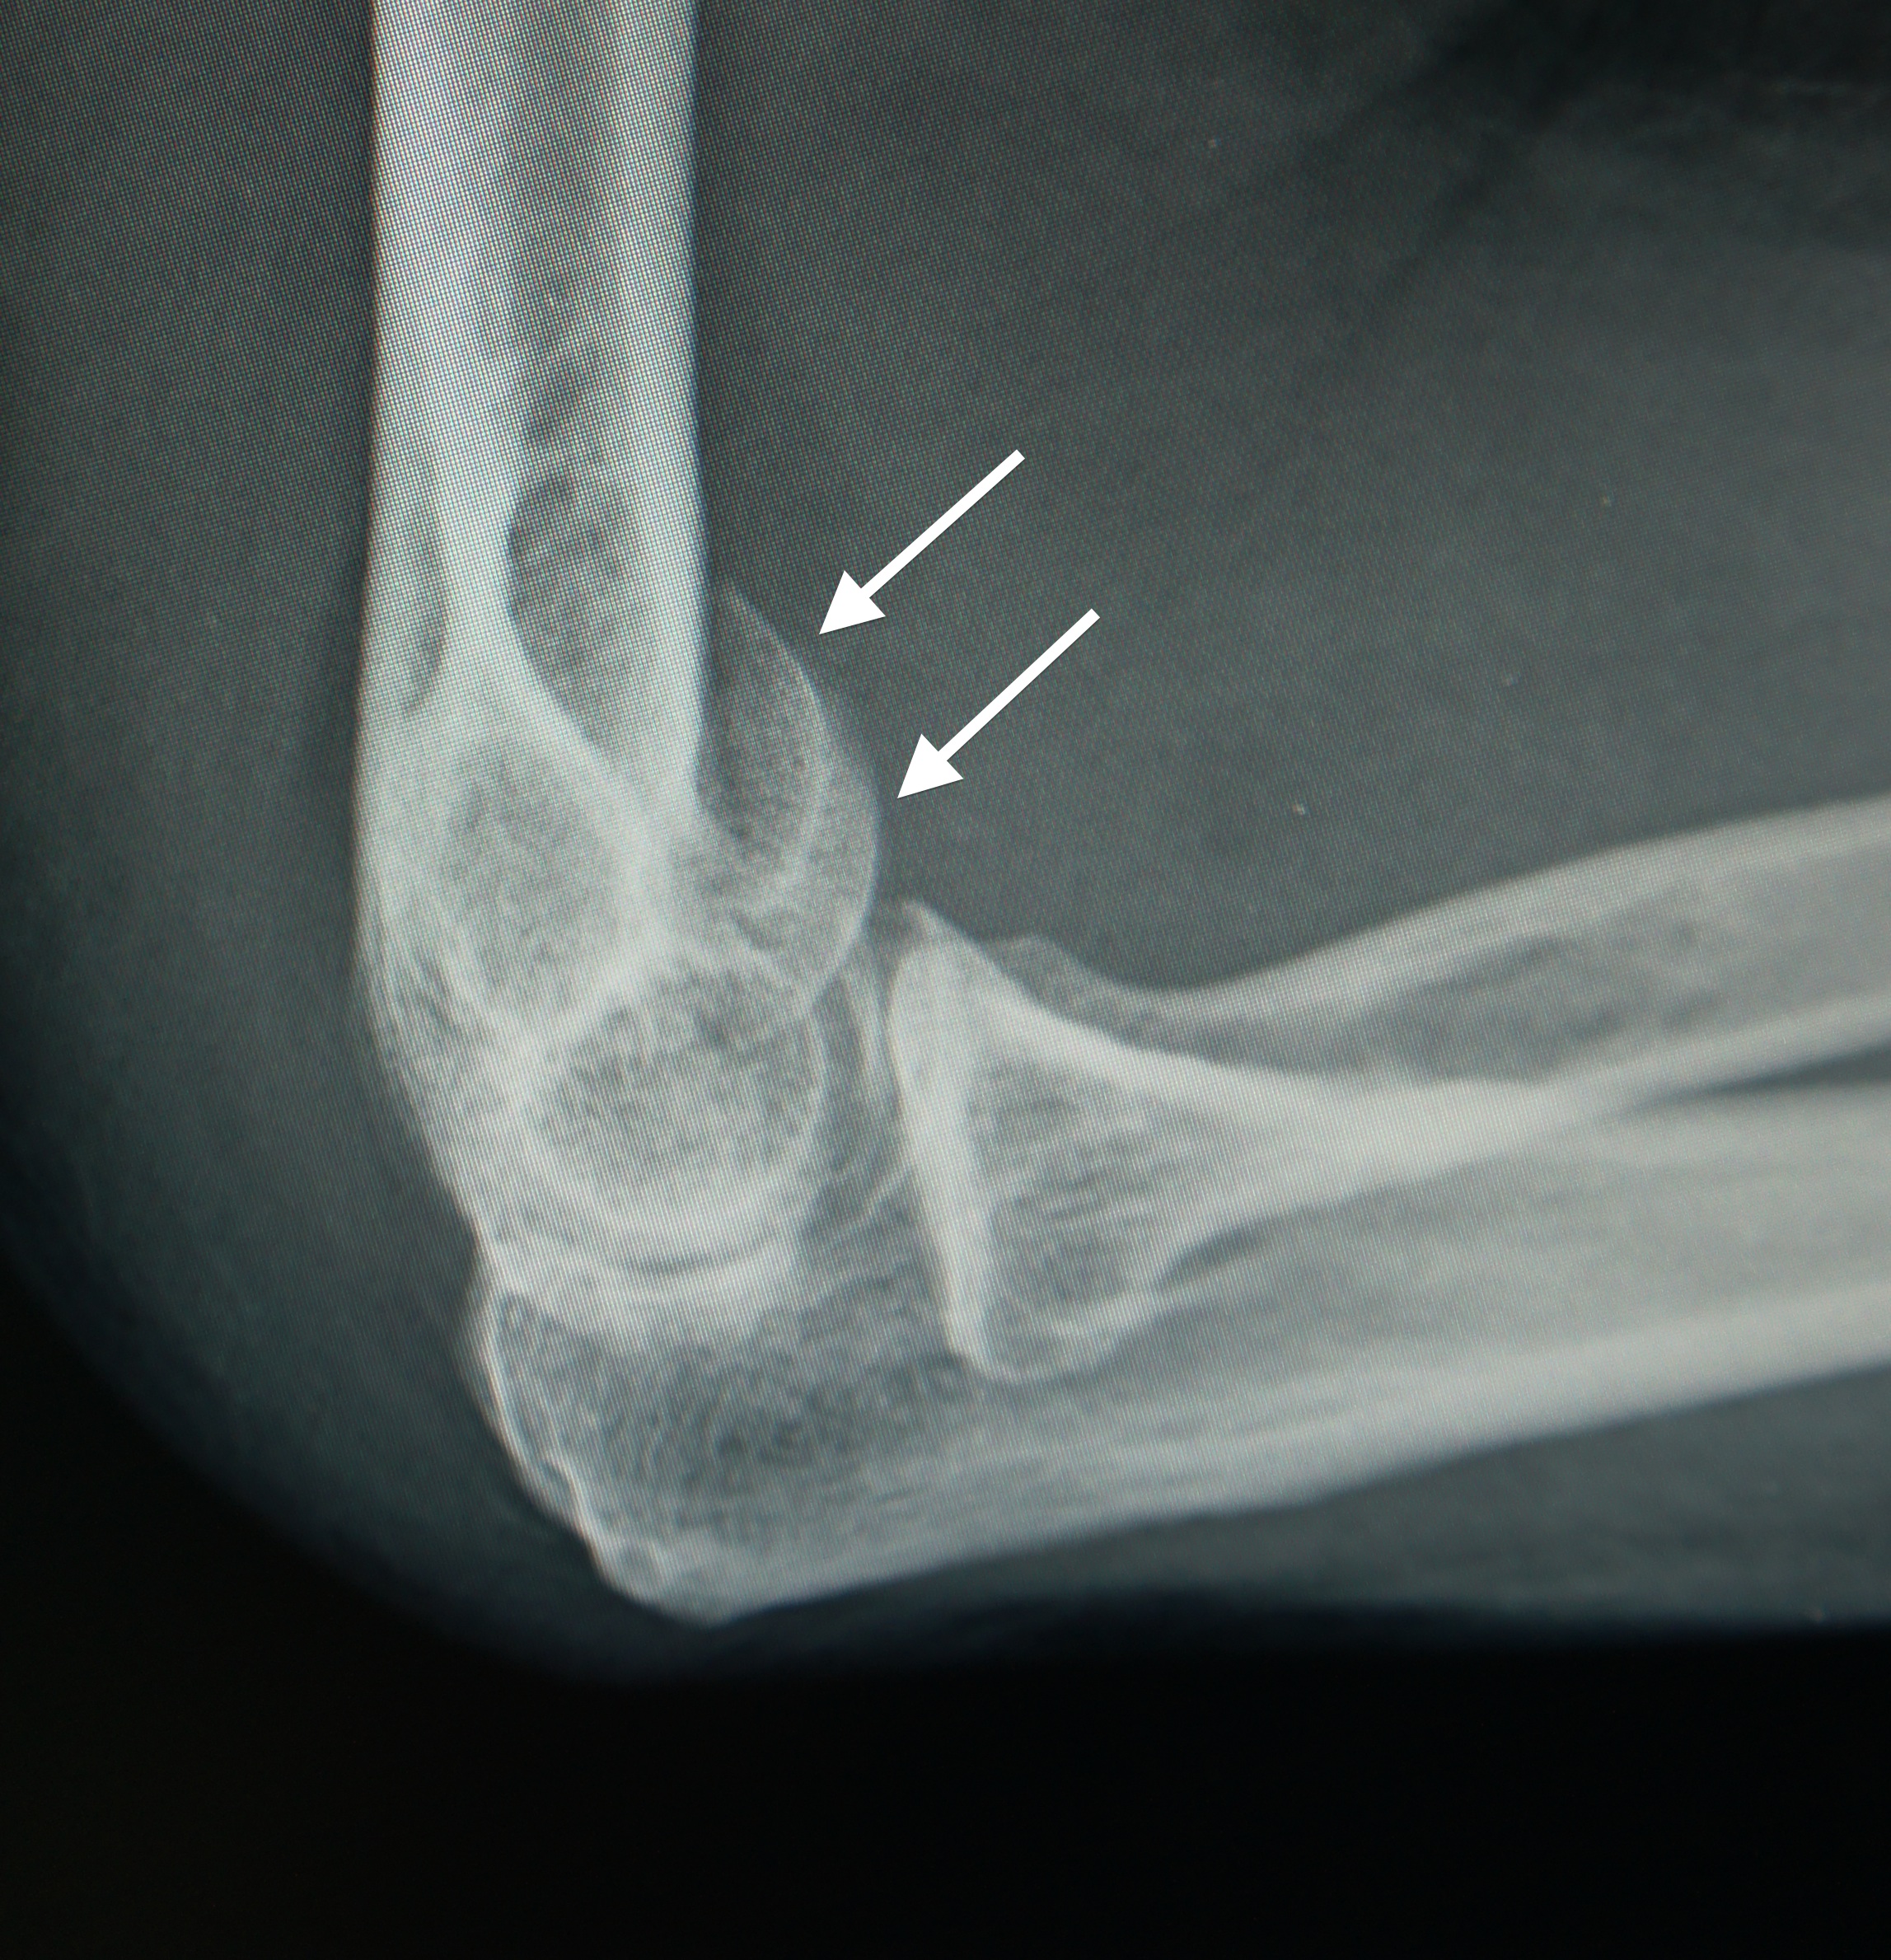 Fractura Humero Distal Images